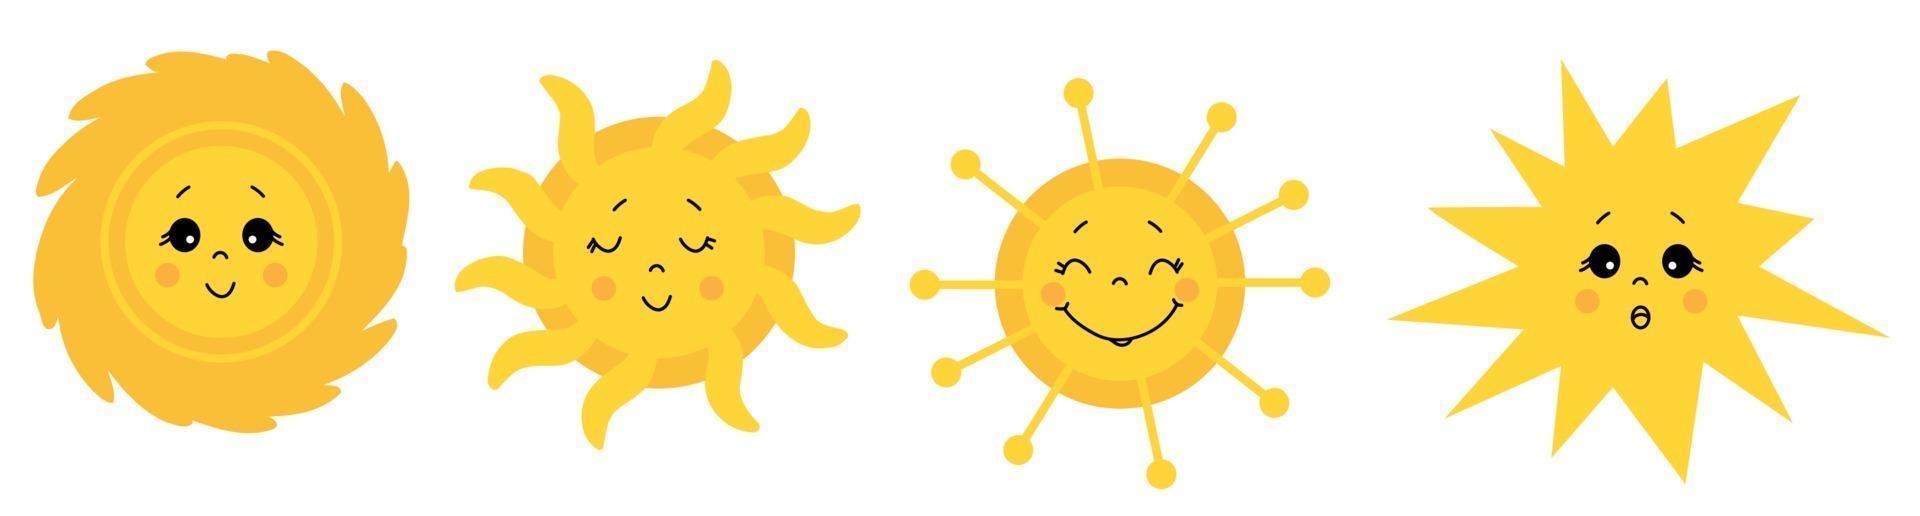 Cute Sun. Vector icon set. Drawings of the sun with different faces and emotions. Closed and open eyes. Vector . Isolated on white background